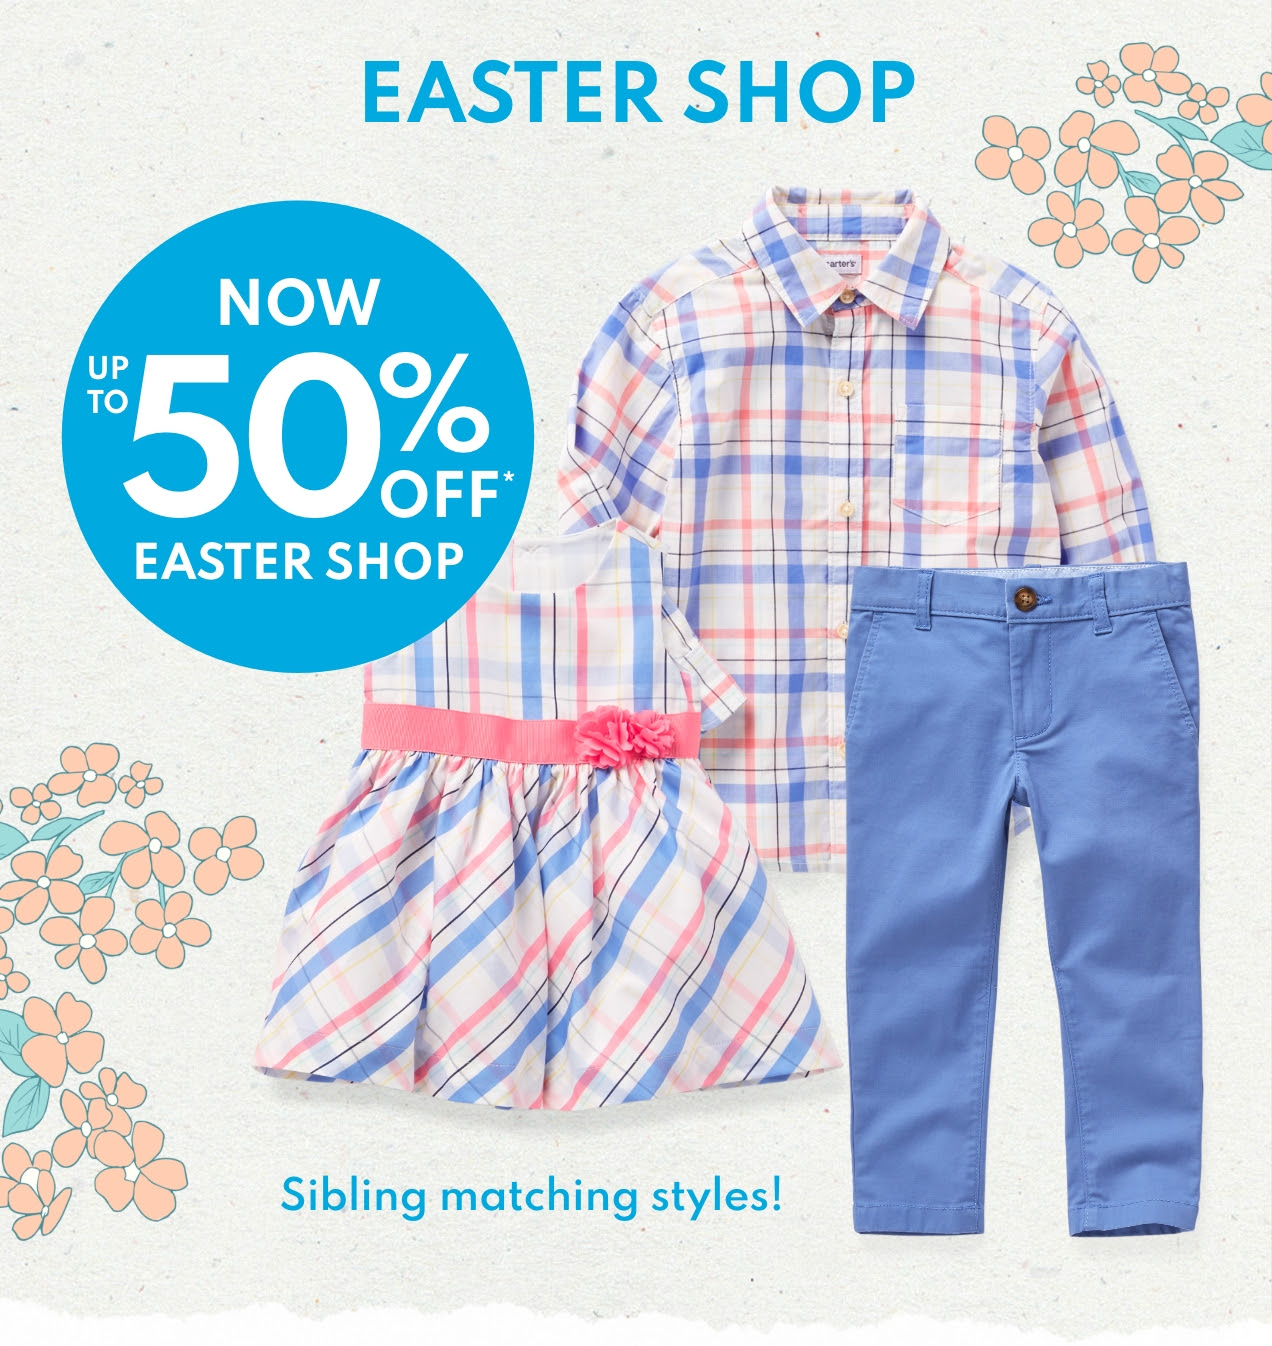 EASTER SHOP | NOW UP TO 50% OFF* EASTER SHOP | Sibling matching styles! 